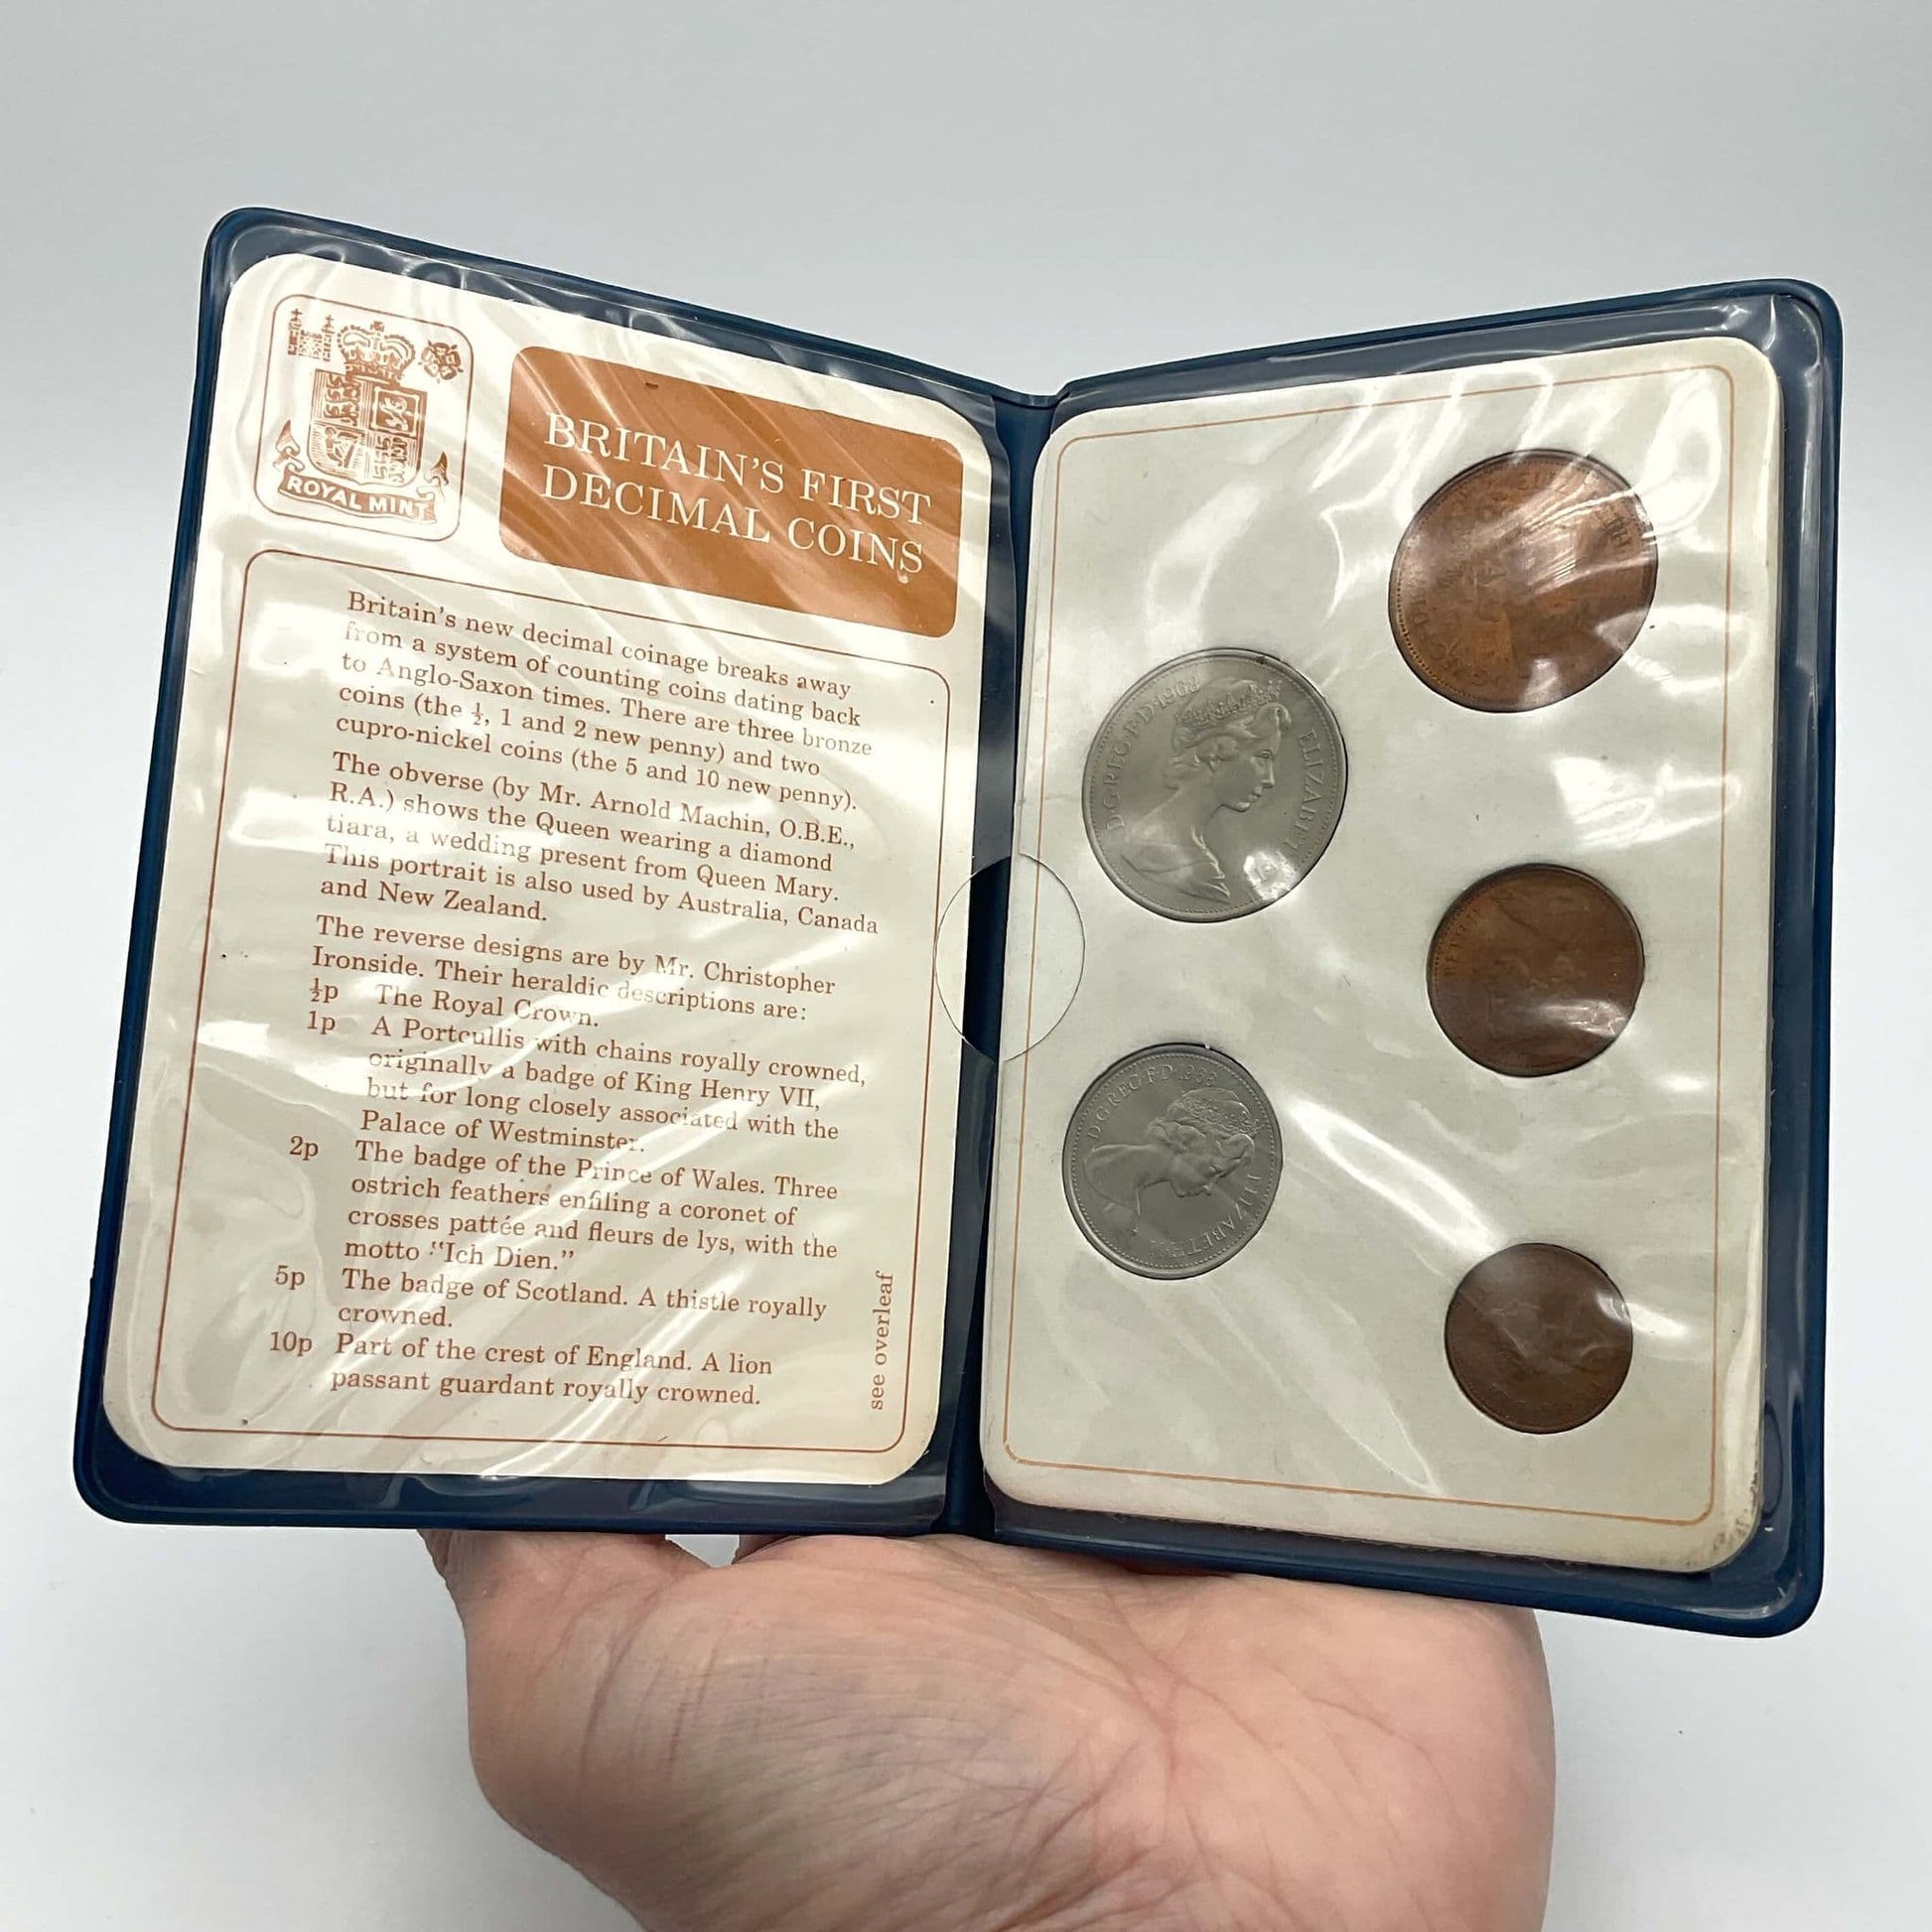 The open view of the coins in Britain's First Decimal Coins Set showing the coins and description